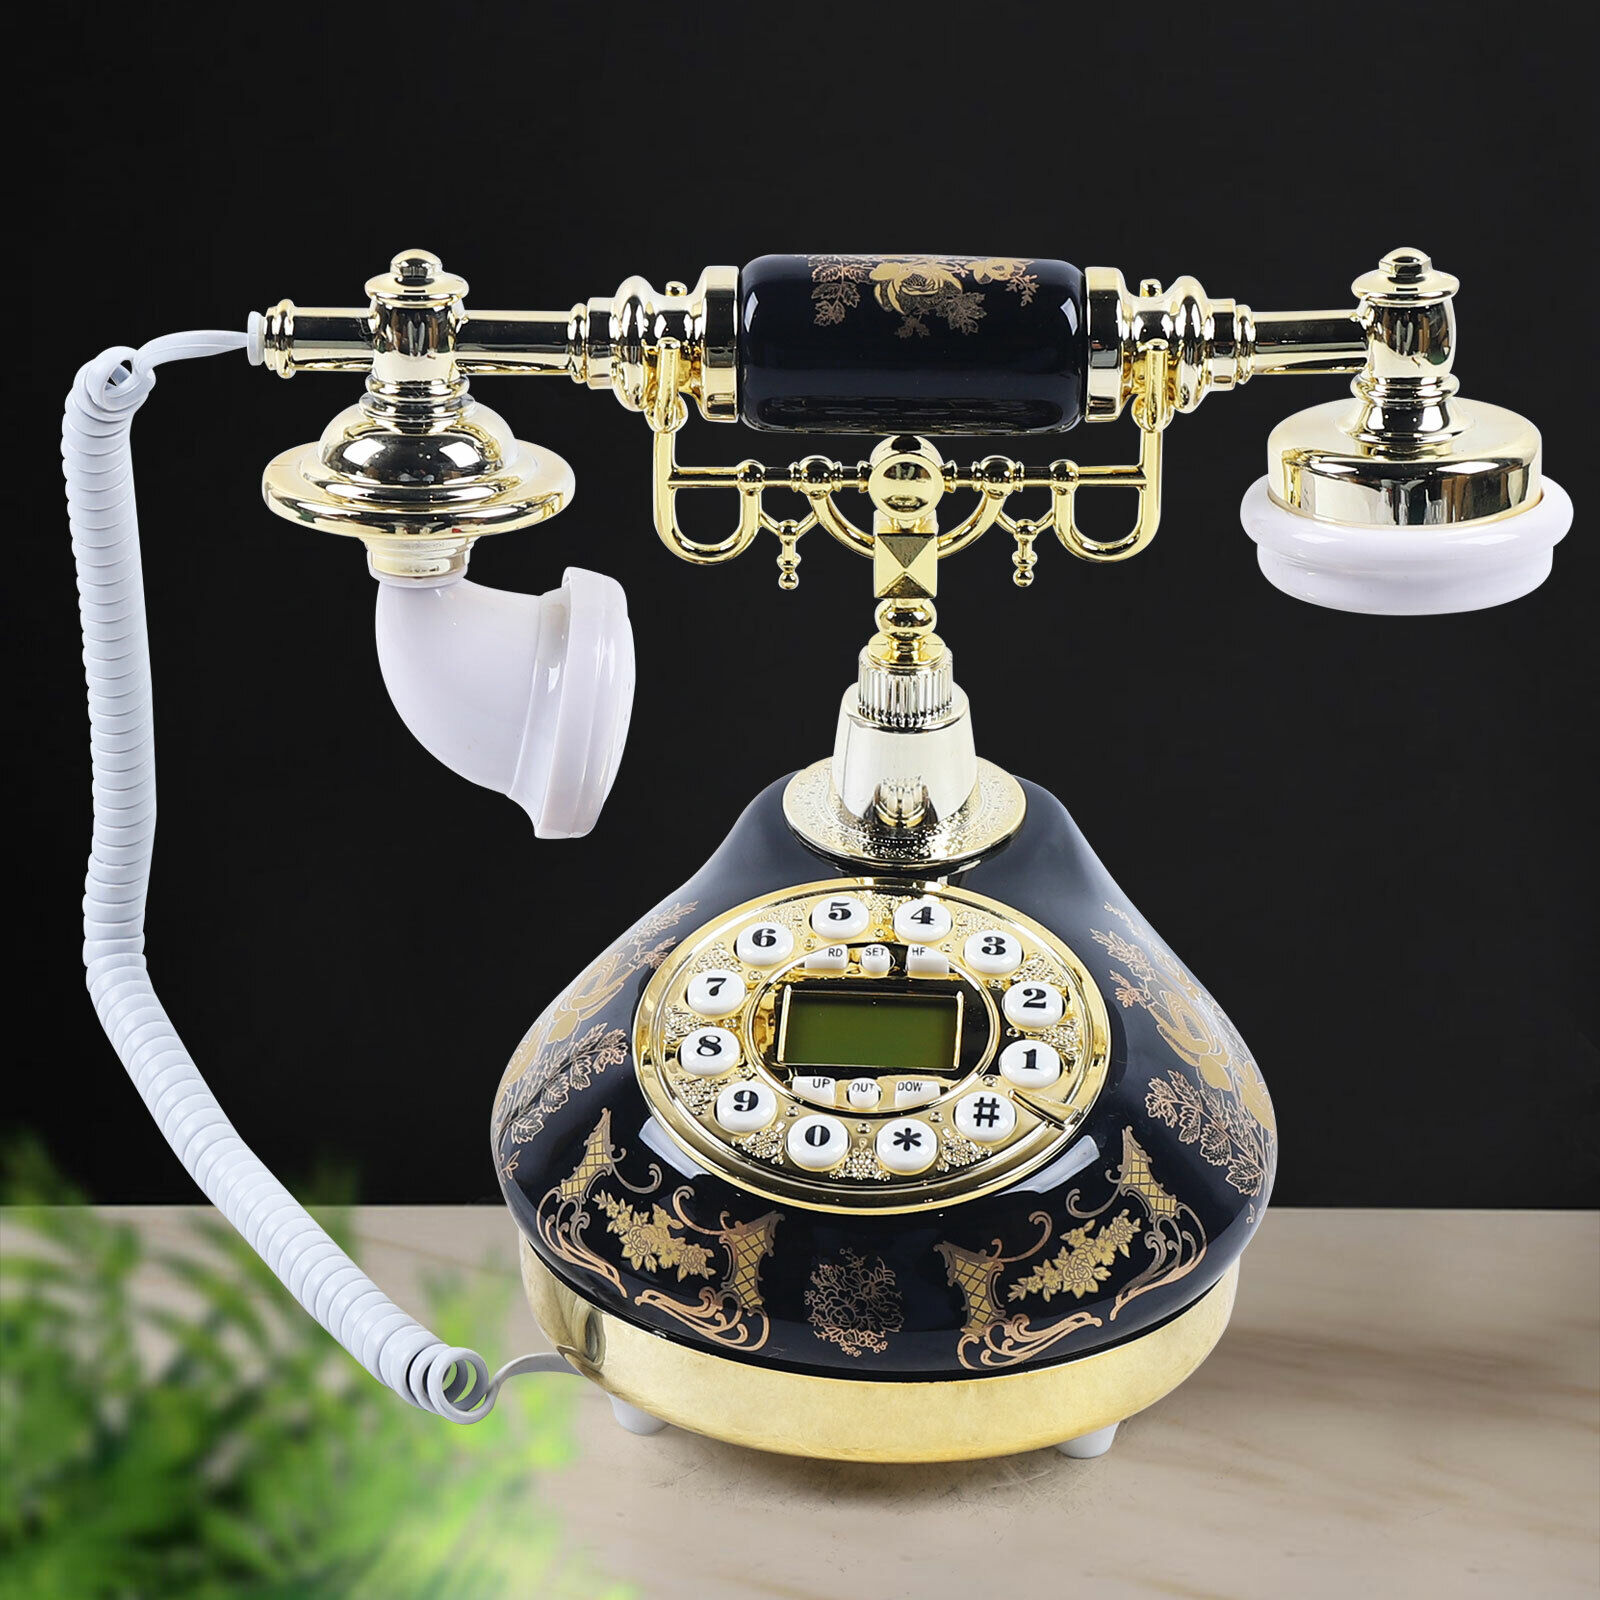 Antique Style Phone Corded Landline Telephone Home Rotary Dial Phone Ceramic